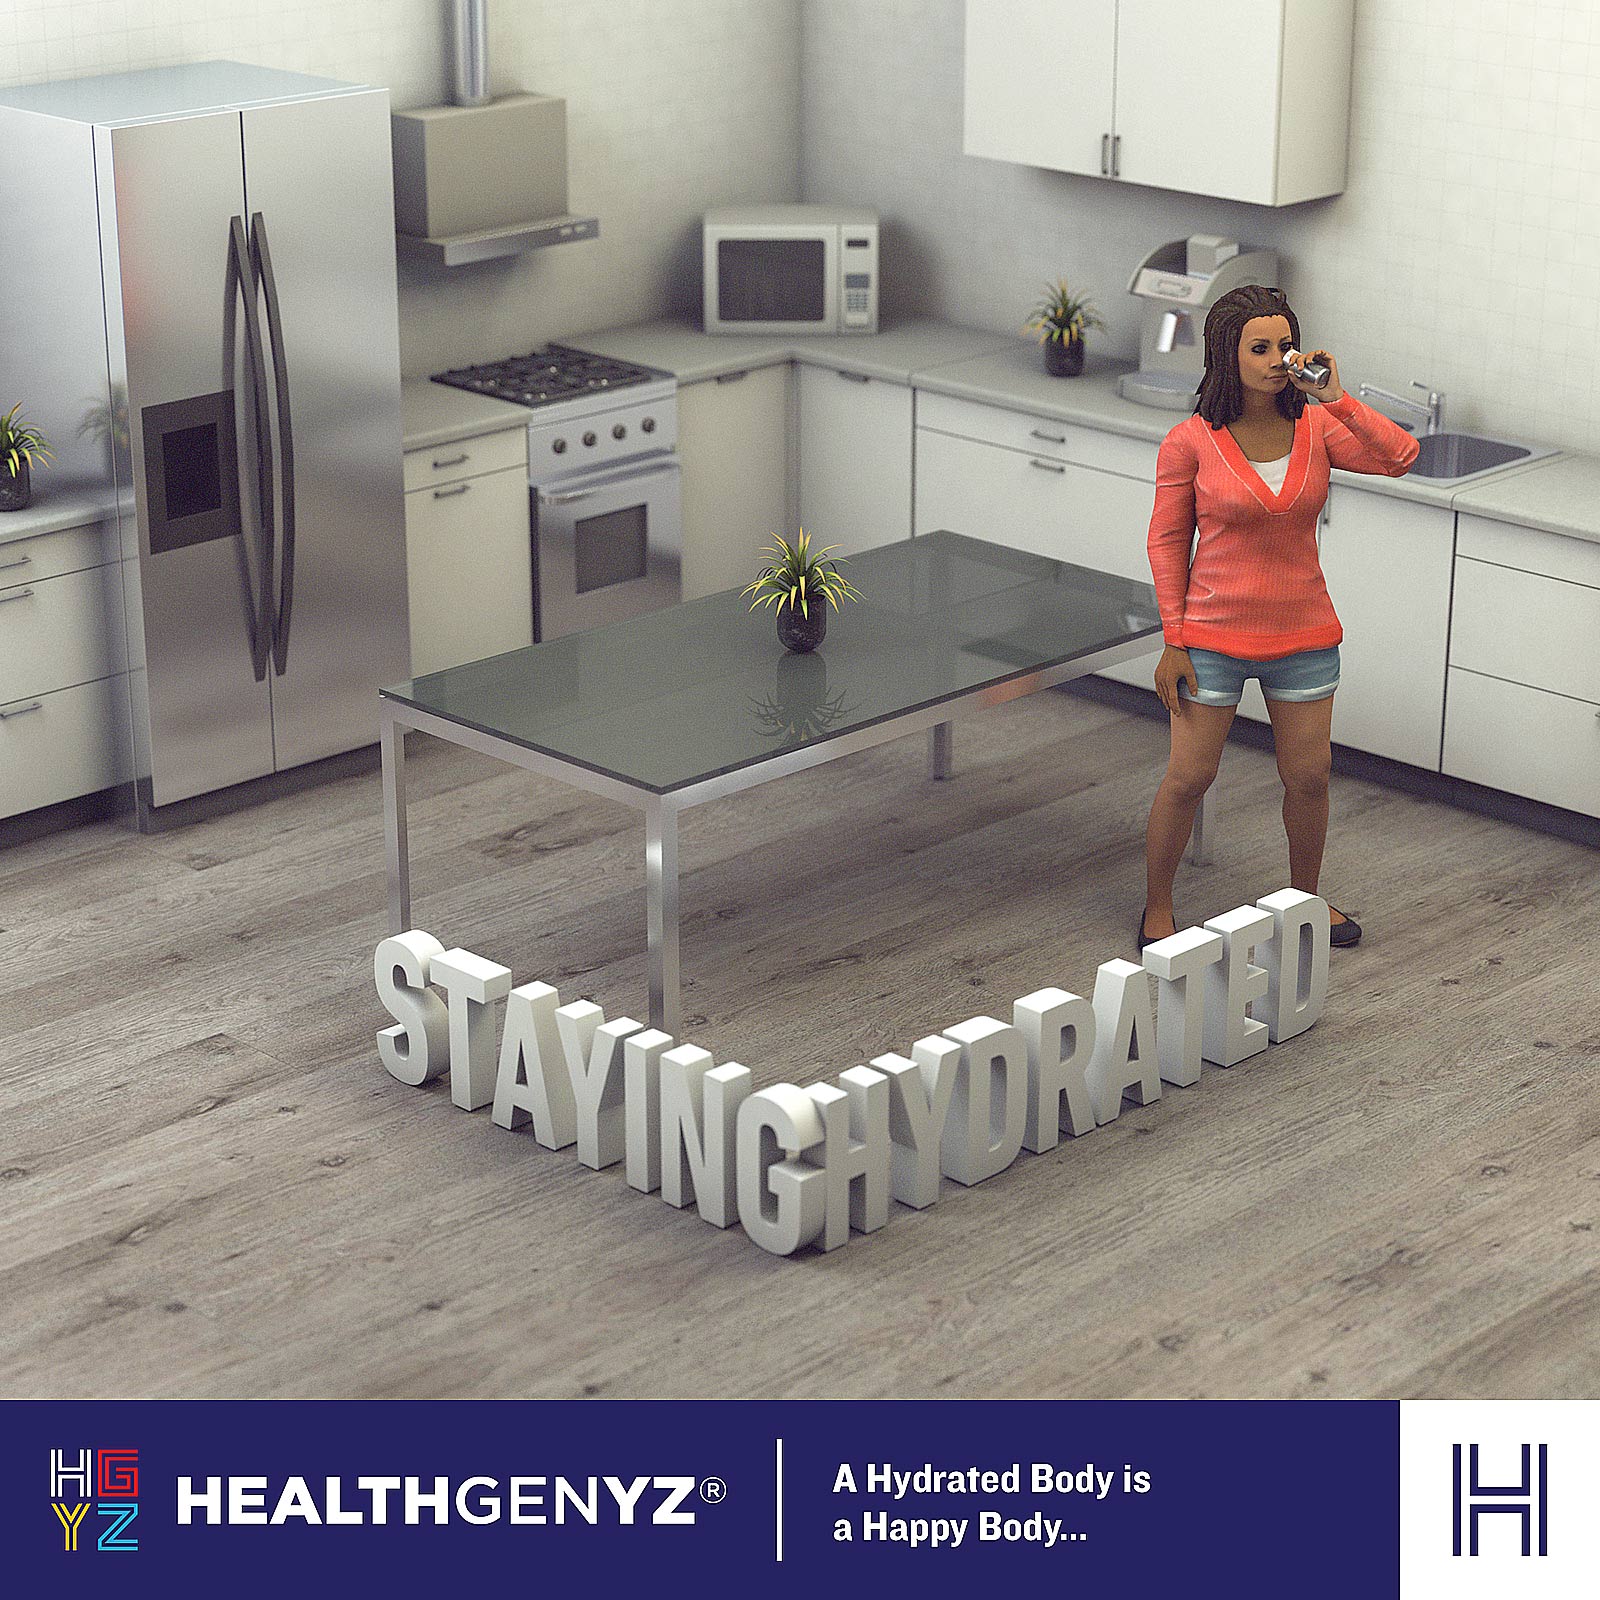 HealthGenYZ category content; a 3D model of a person in a salmon-pink blouse with a white shirt underneath, and acid-wash jean shorts, standing in a white kitchen with hardwood floors, drinking water, with the words, "Staying Hydrated" on the floor in 3D extruded text.